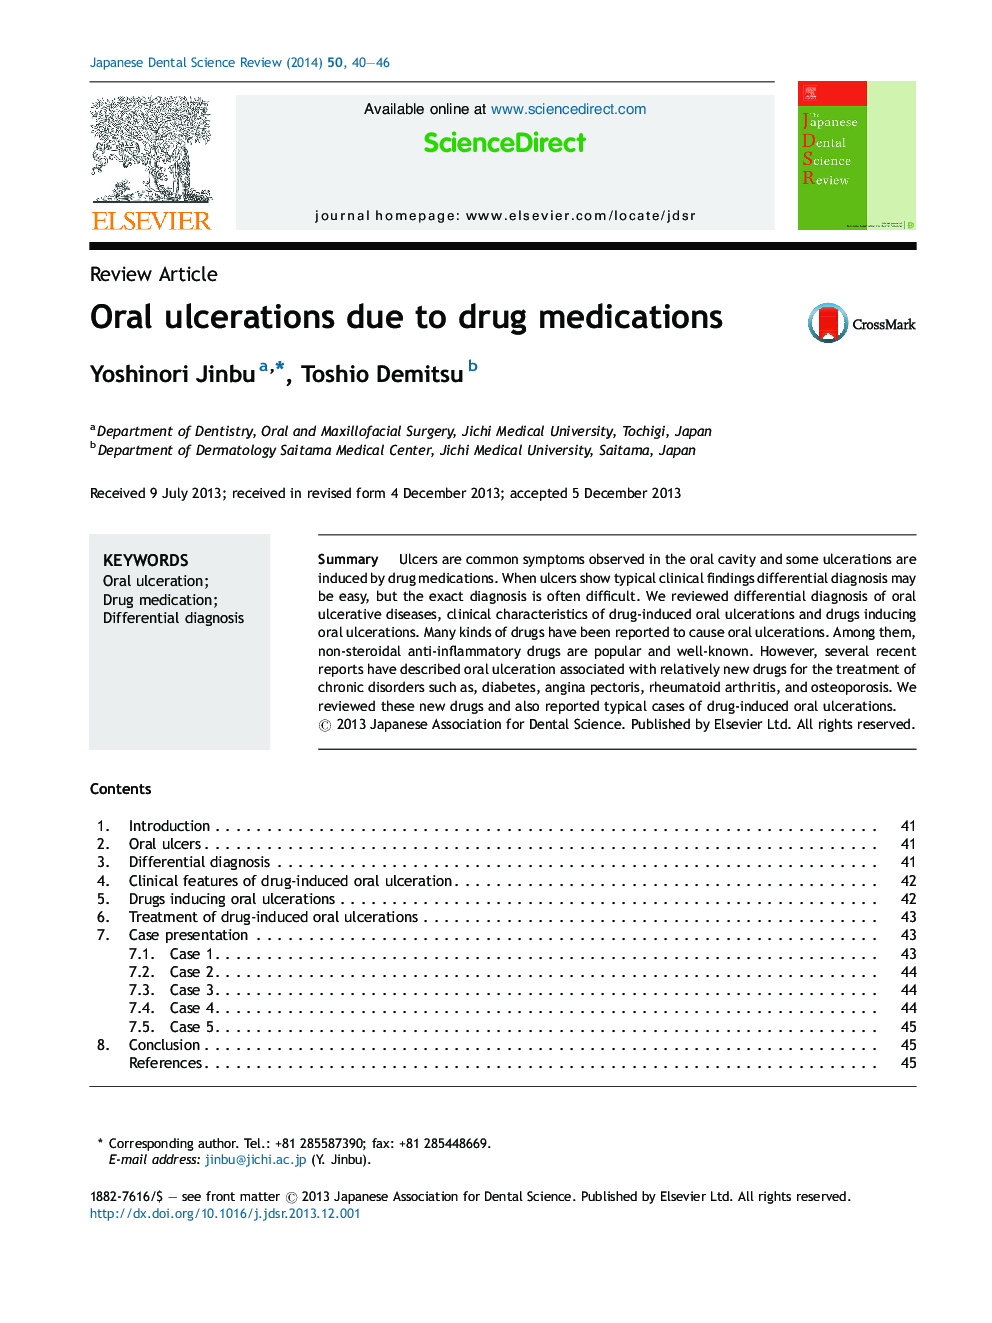 Oral ulcerations due to drug medications